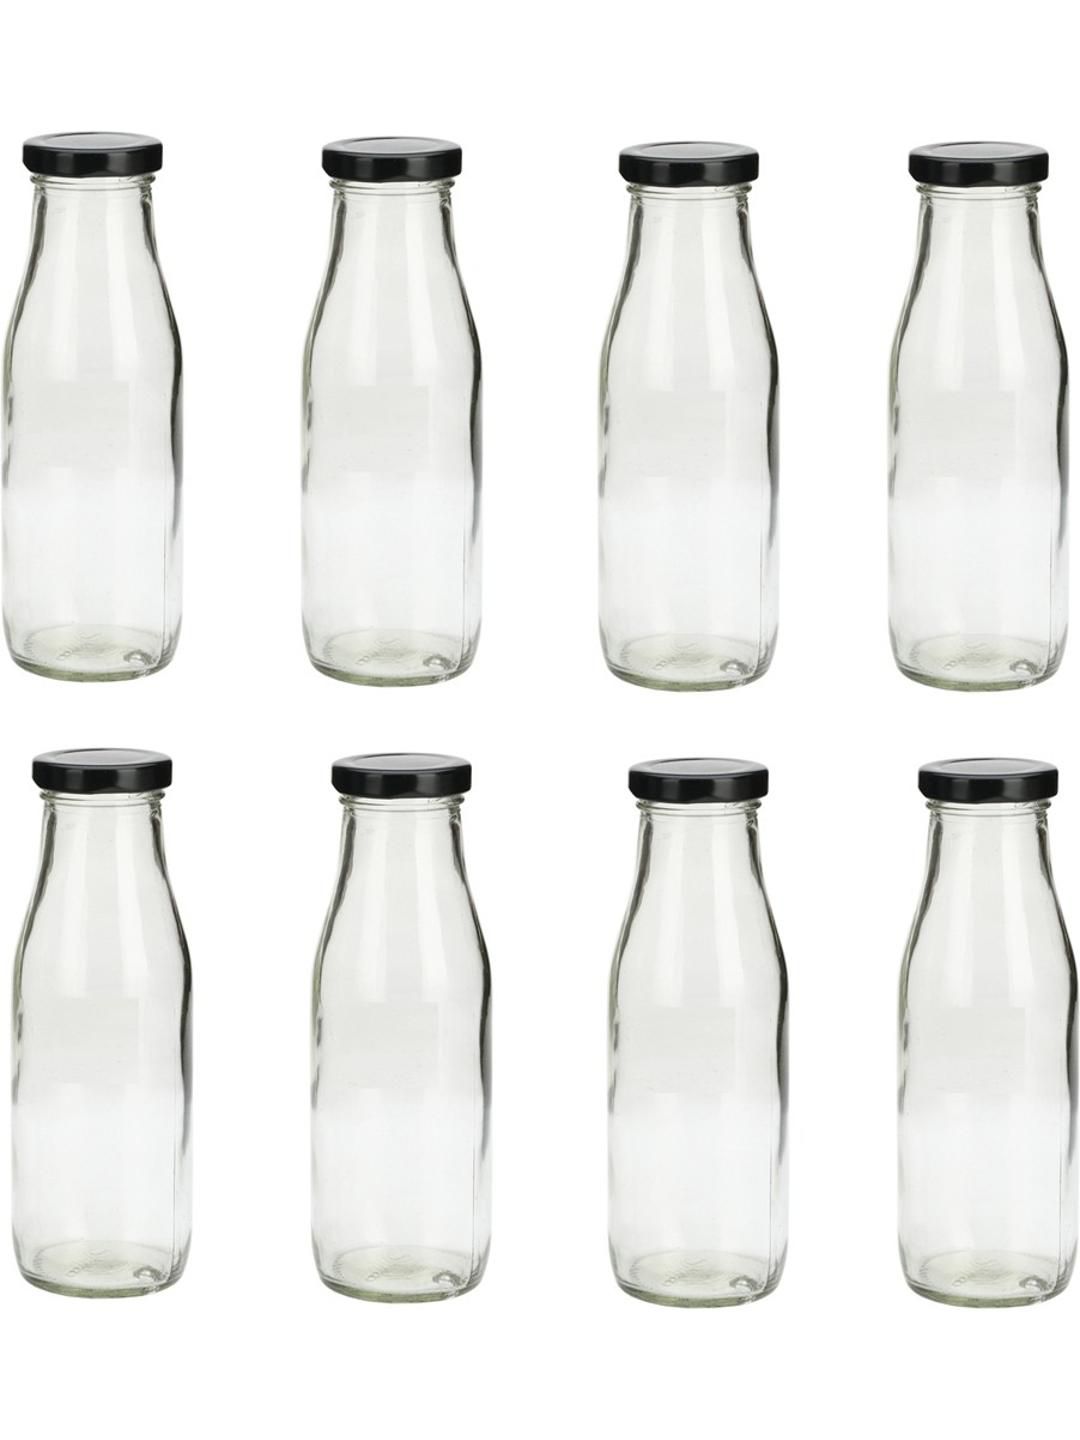     			AFAST Multipurpose Bottle Glass Transparent Utility Container ( Set of 8 )